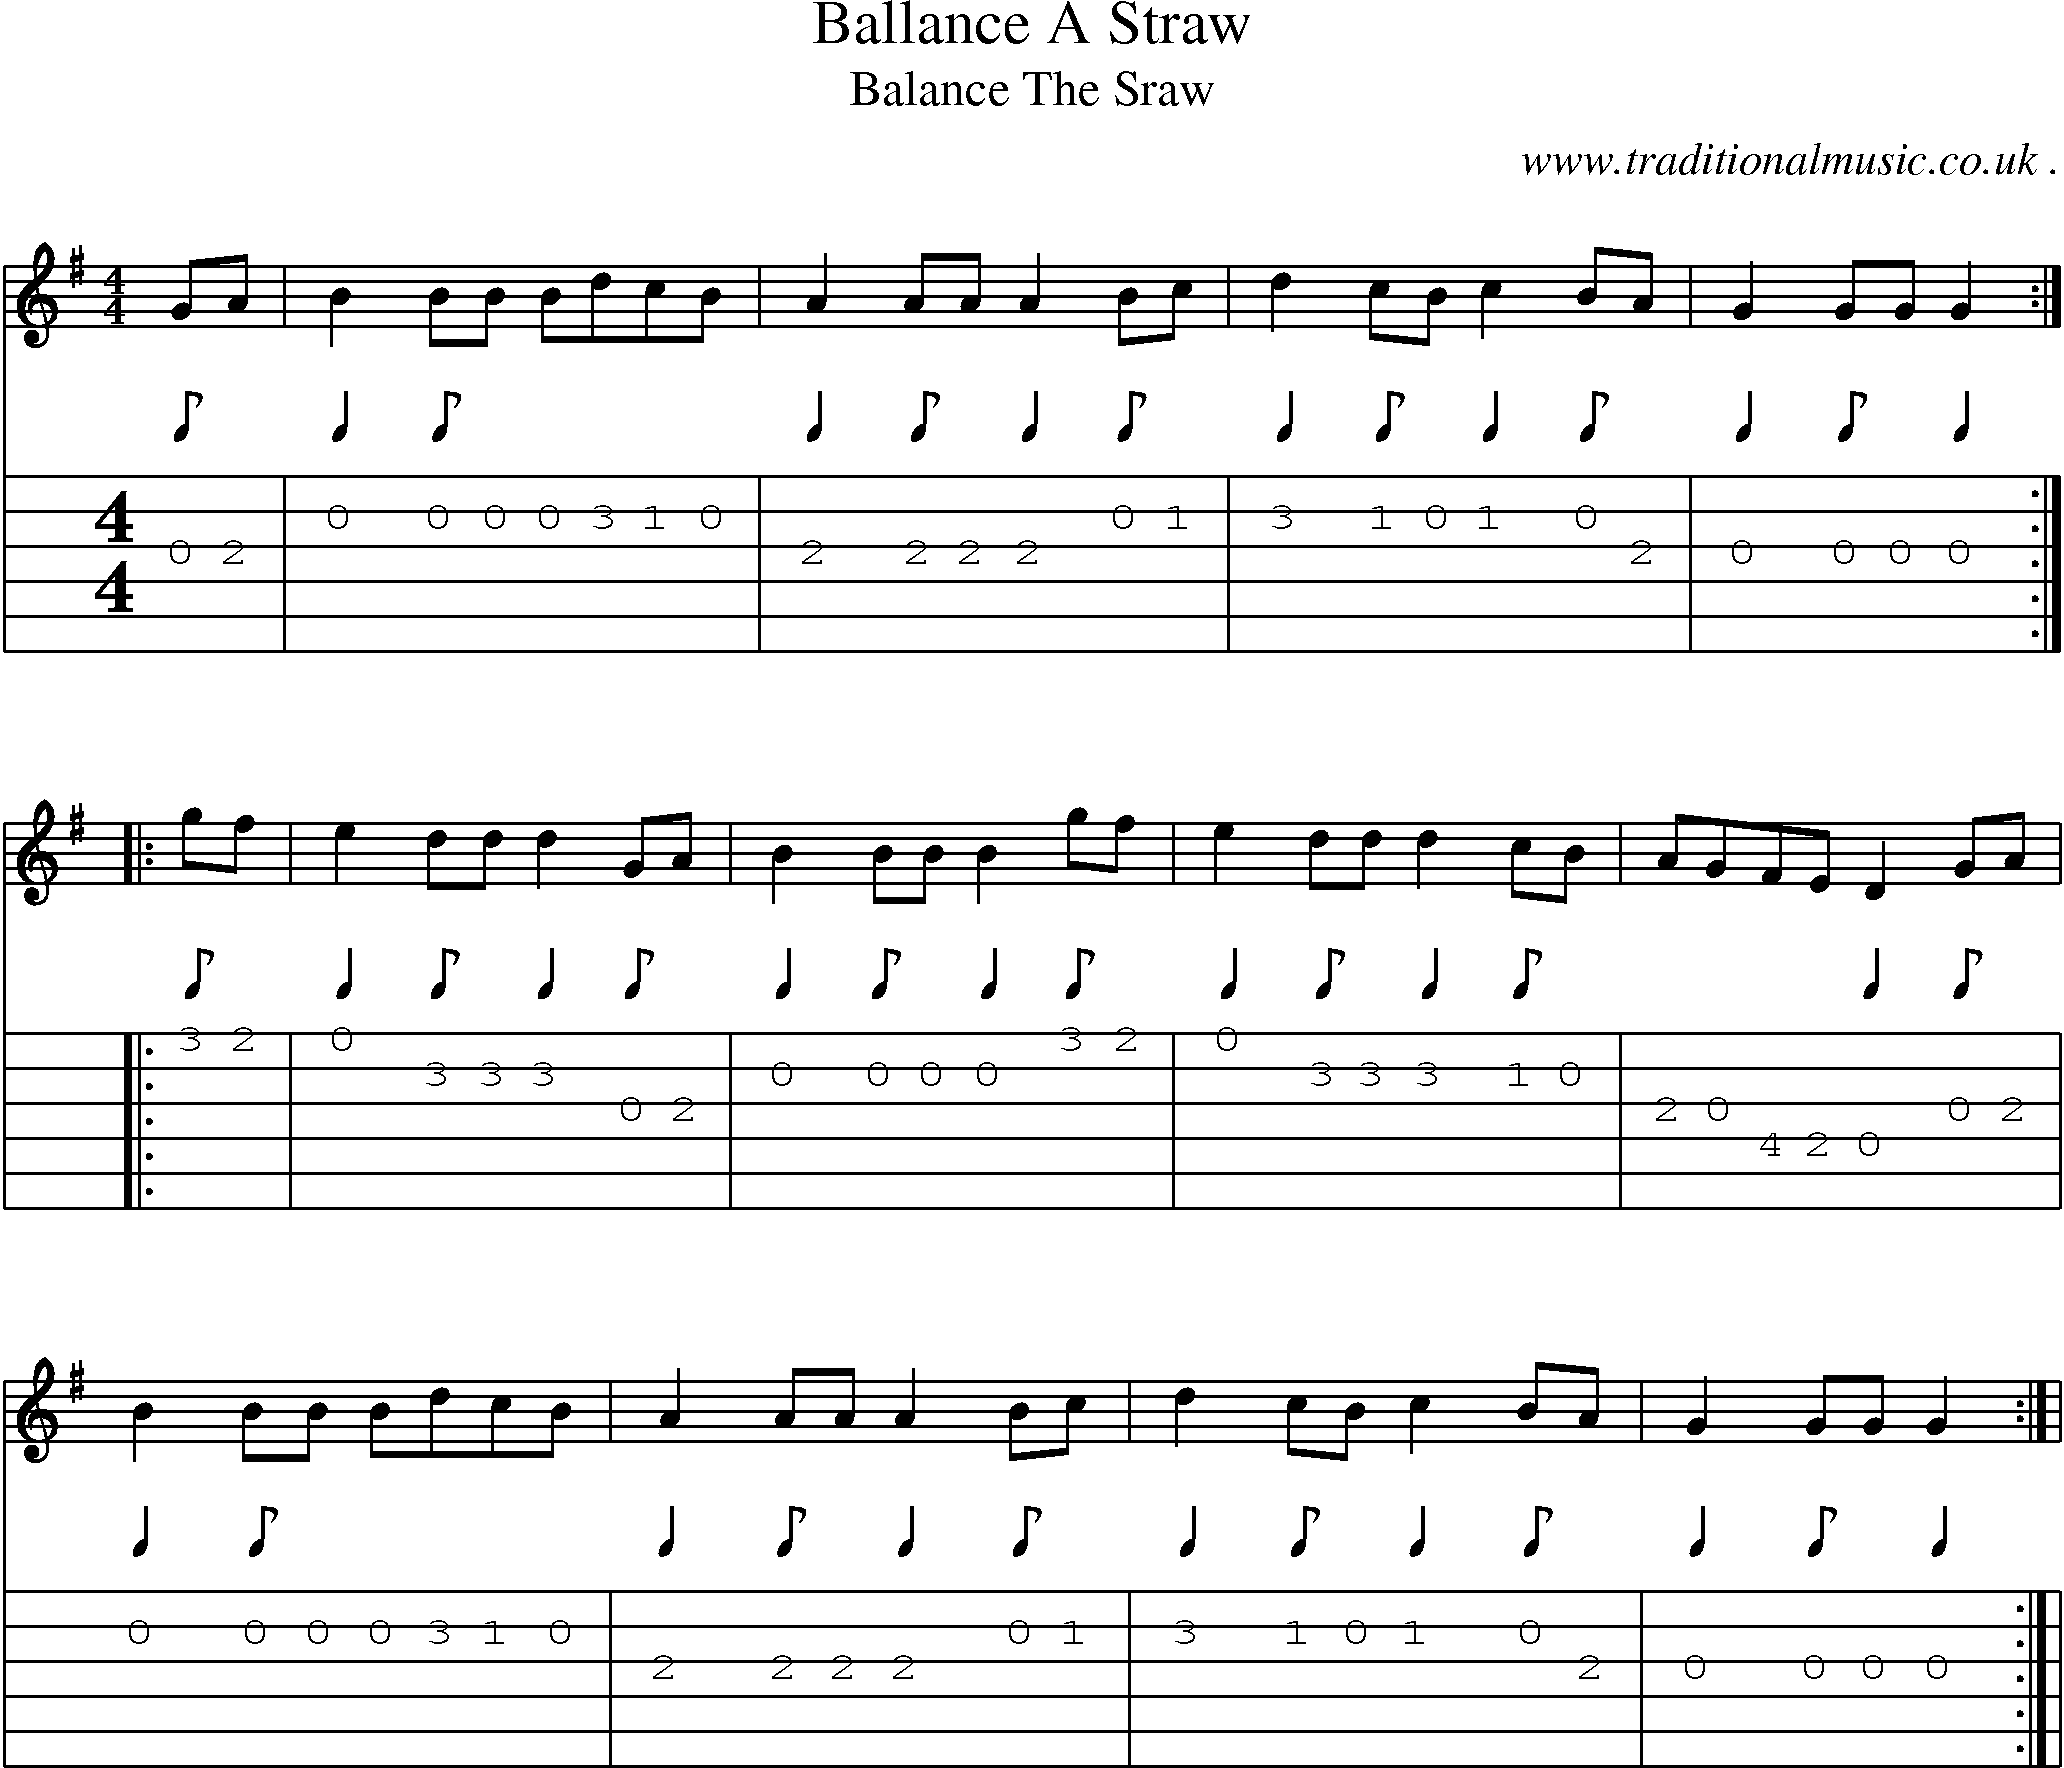 Sheet-Music and Guitar Tabs for Ballance A Straw